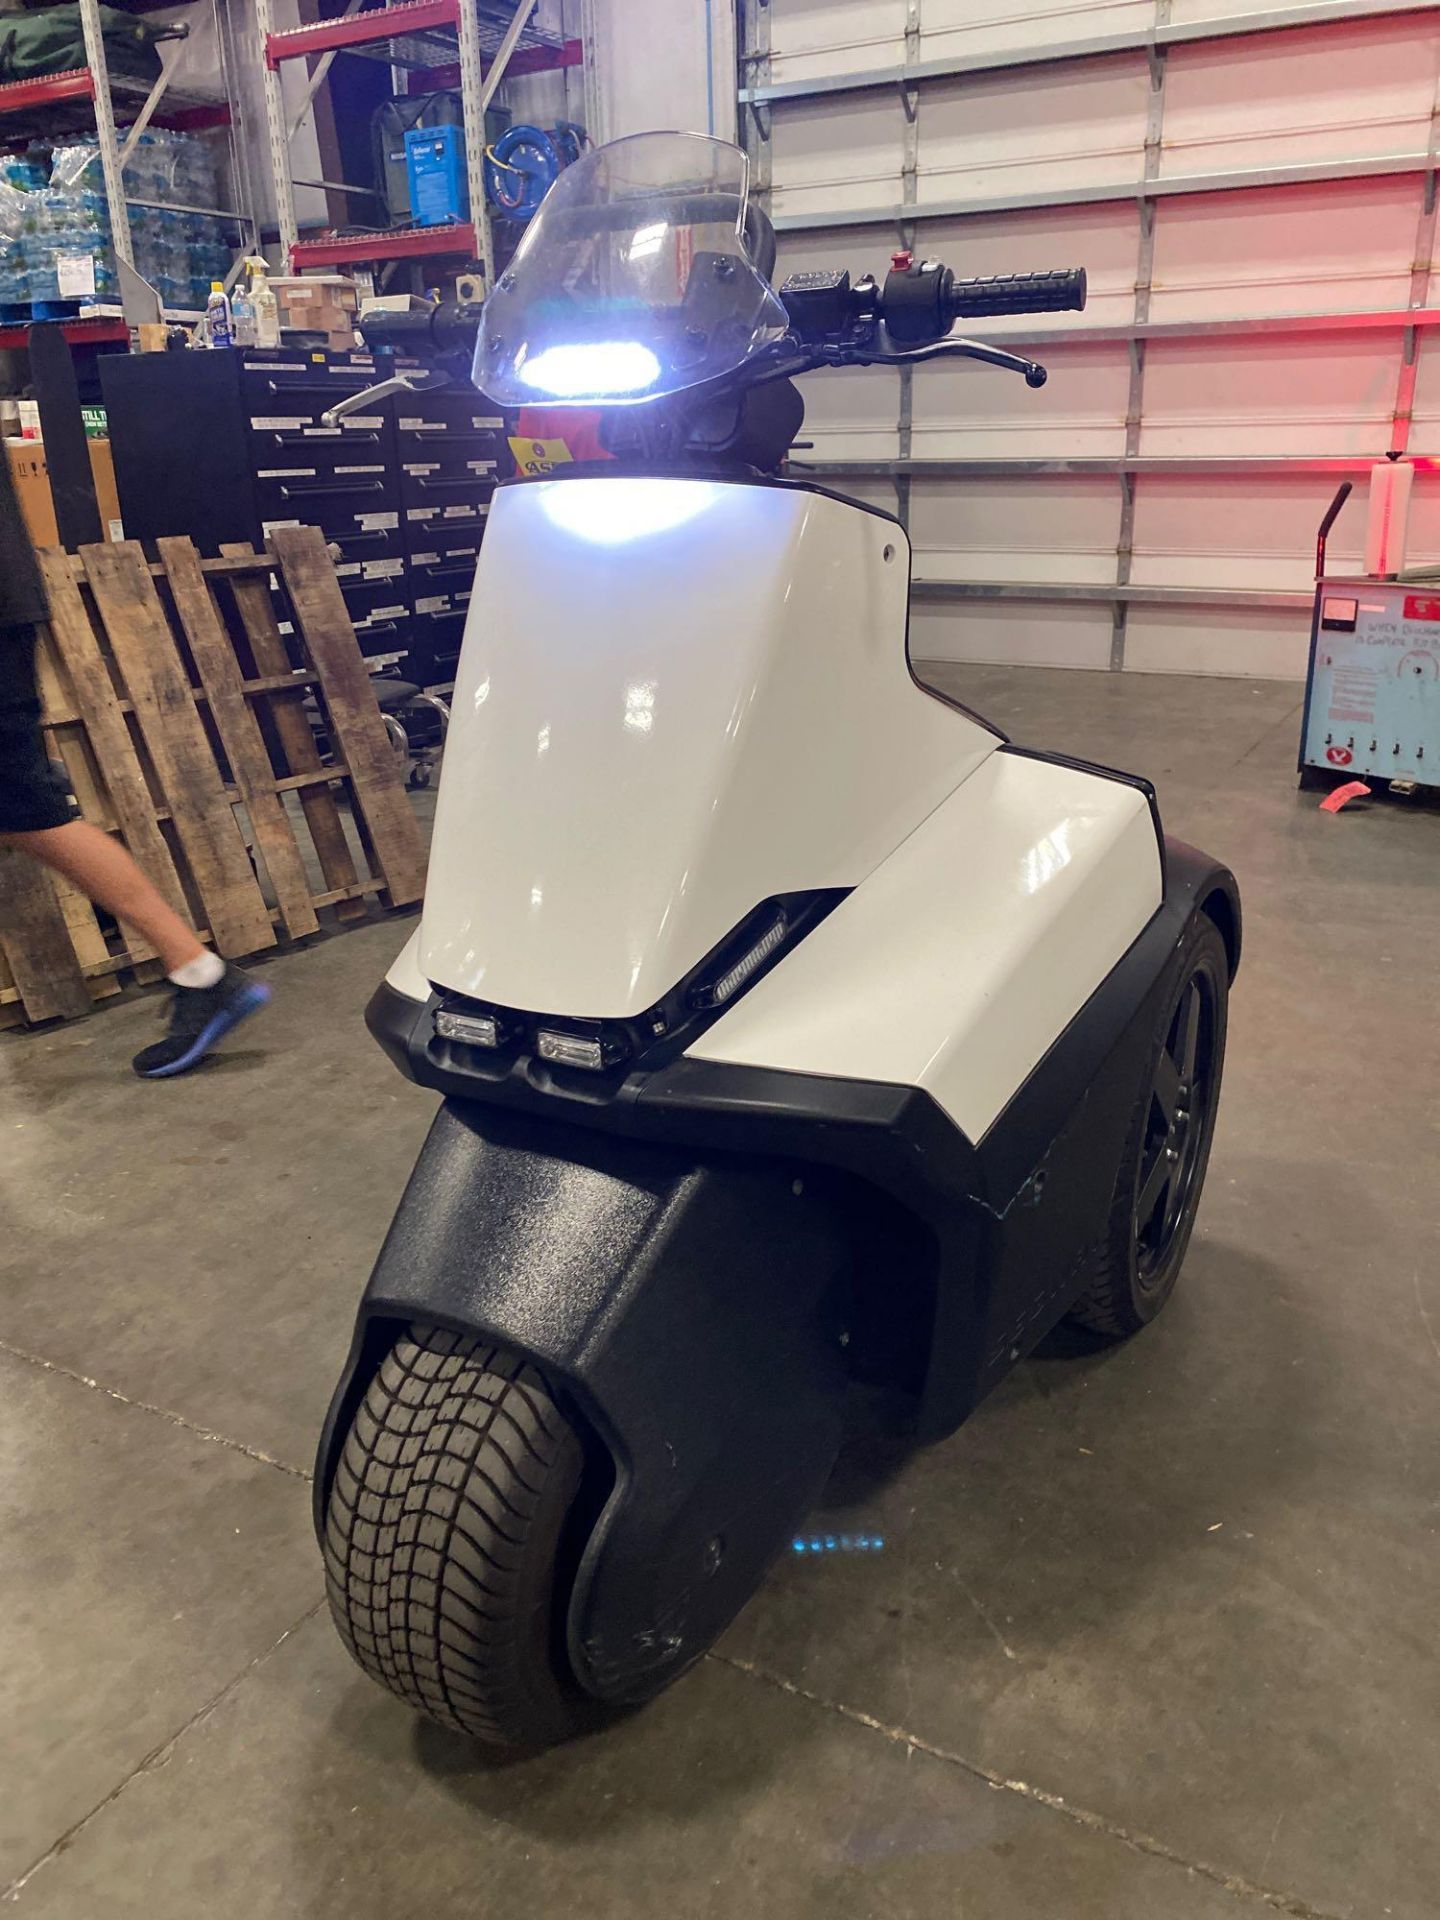 3-WHEEL SEGWAY WITH SIREN, RED WHITE & BLUE LIGHTS, 3,501.4 MILES, RUNS AND DRIVES - Image 12 of 22